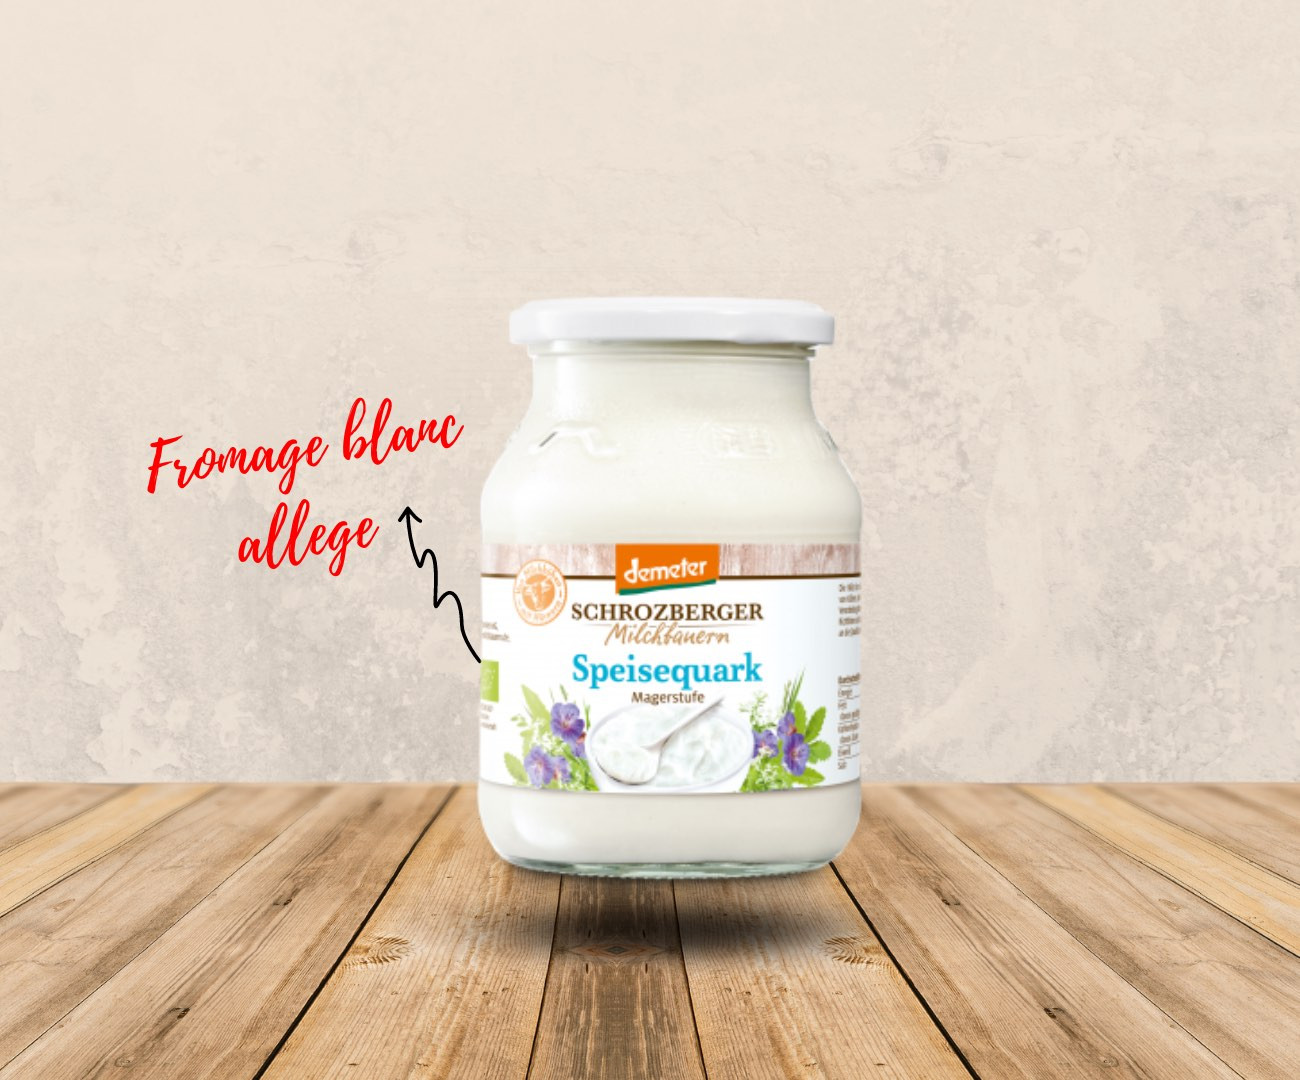 Fromage blanc allege 500g